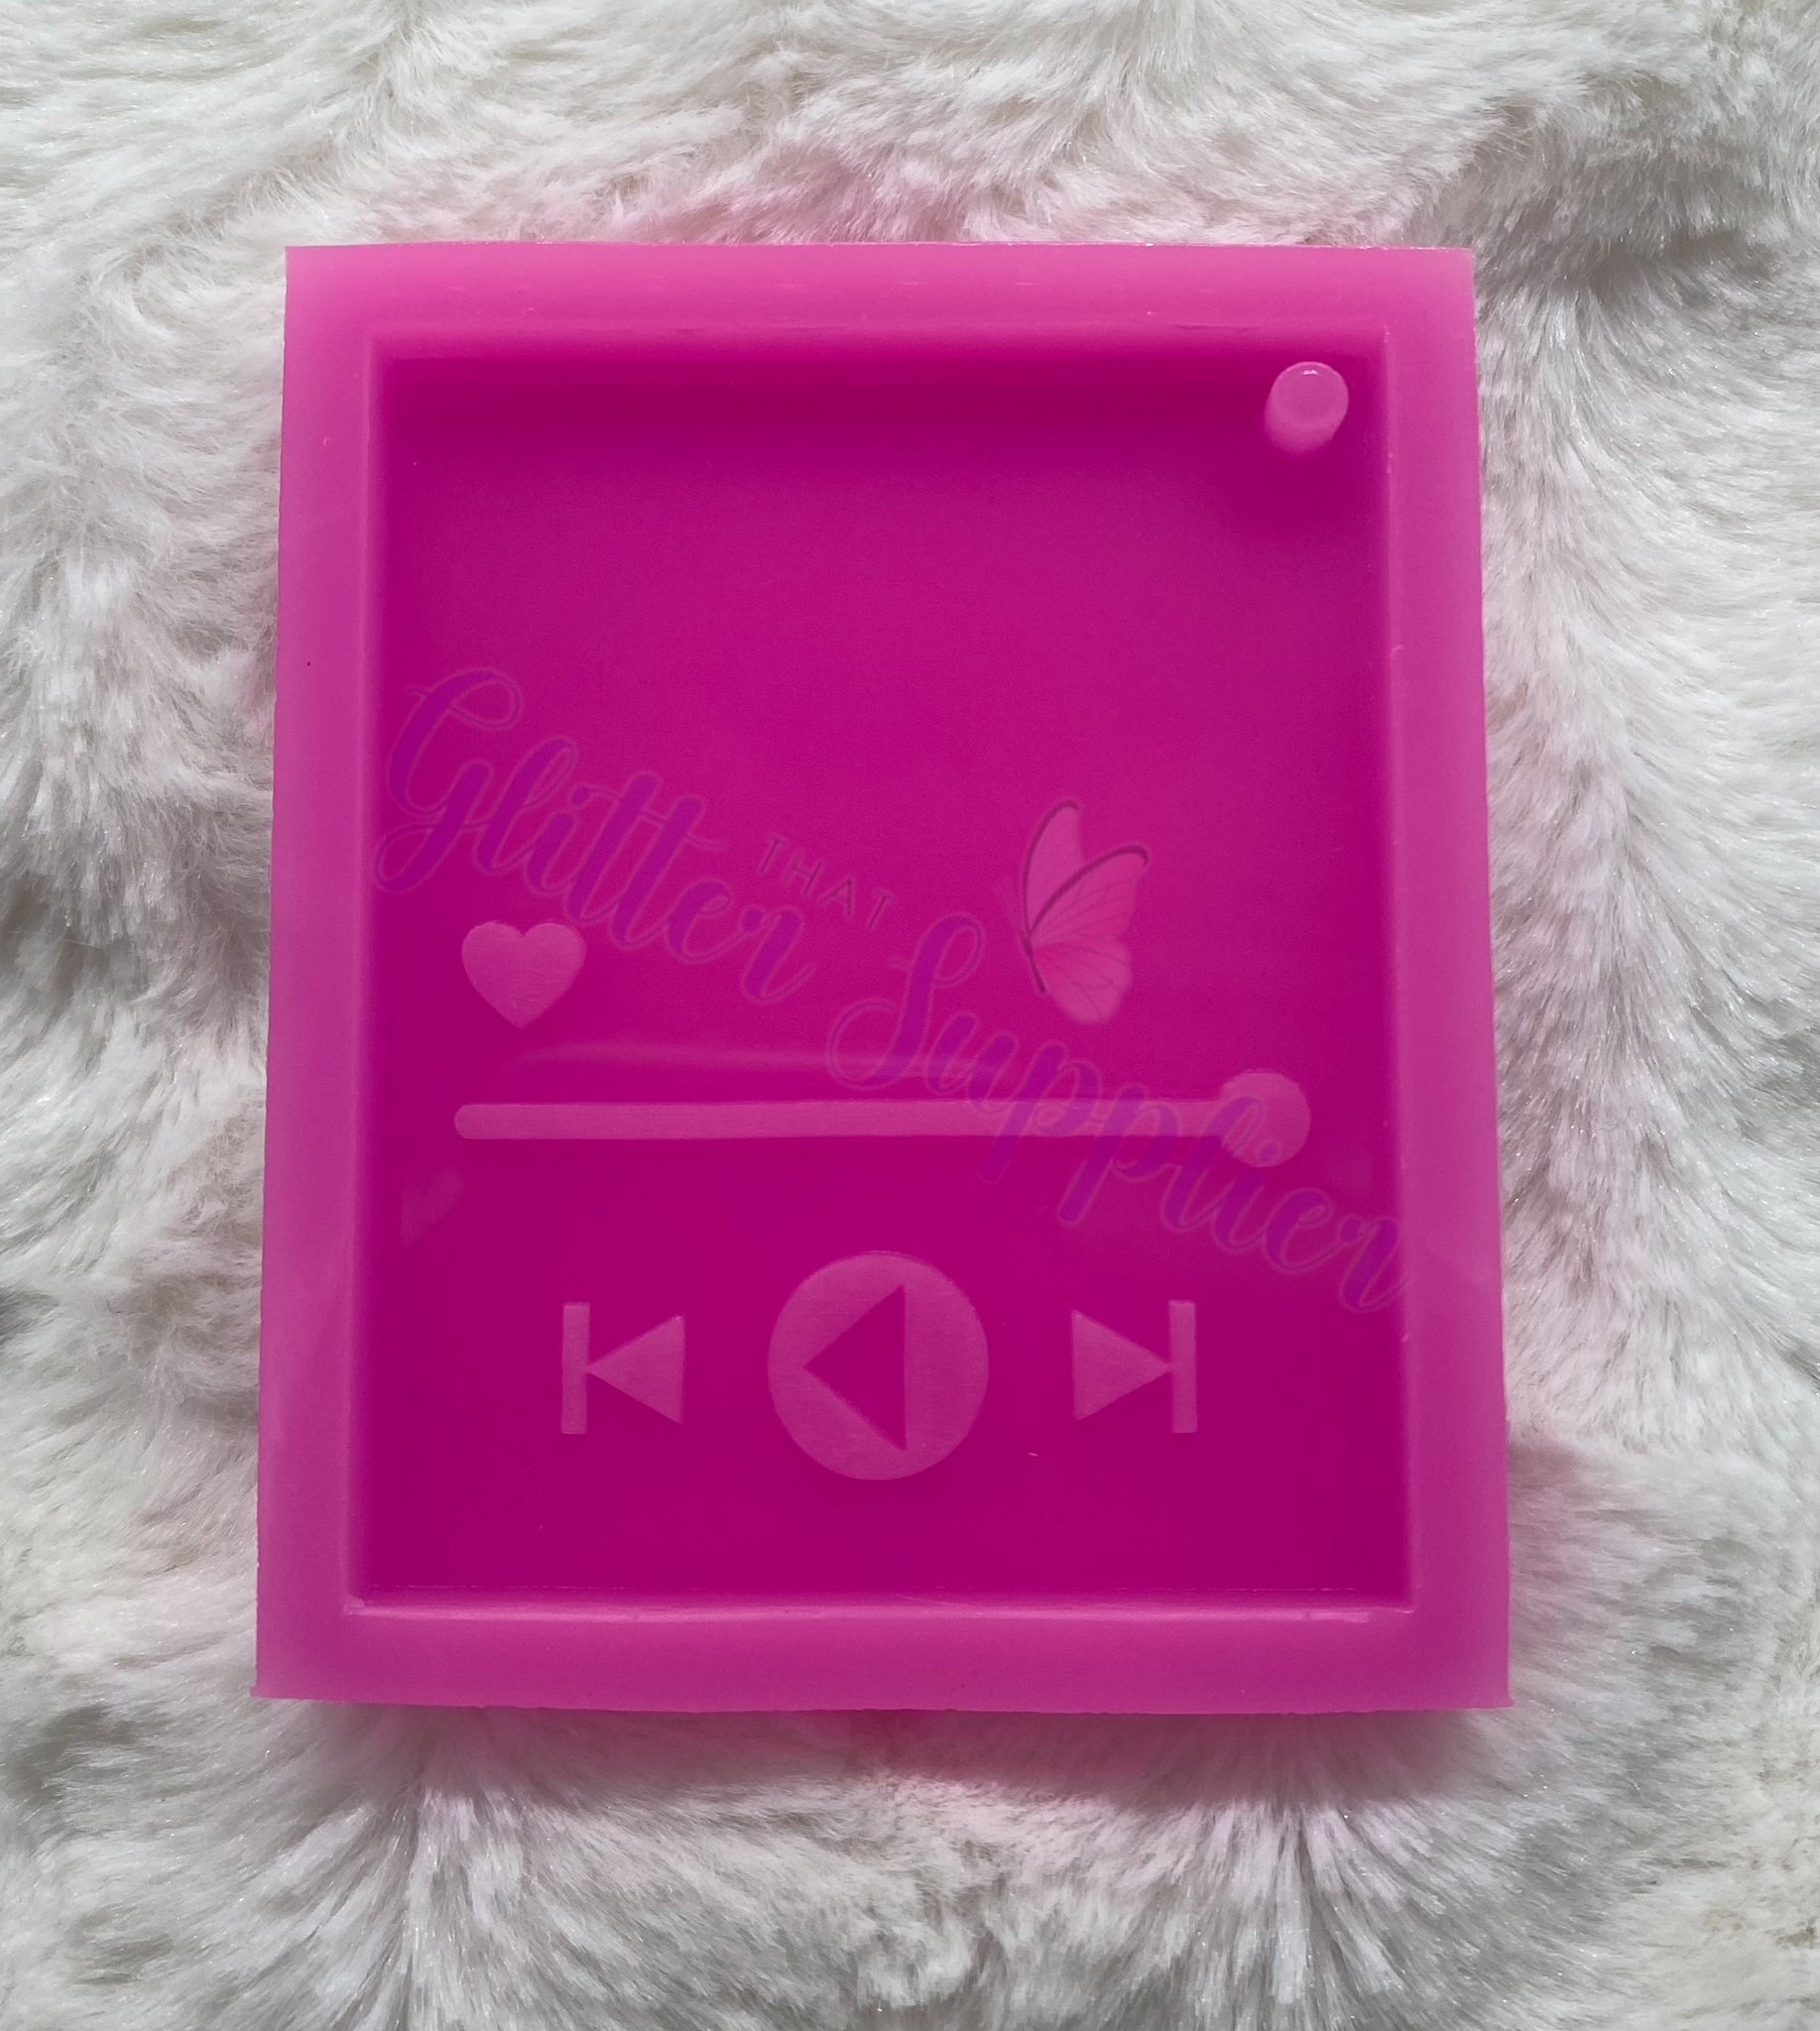 Music Player Mold